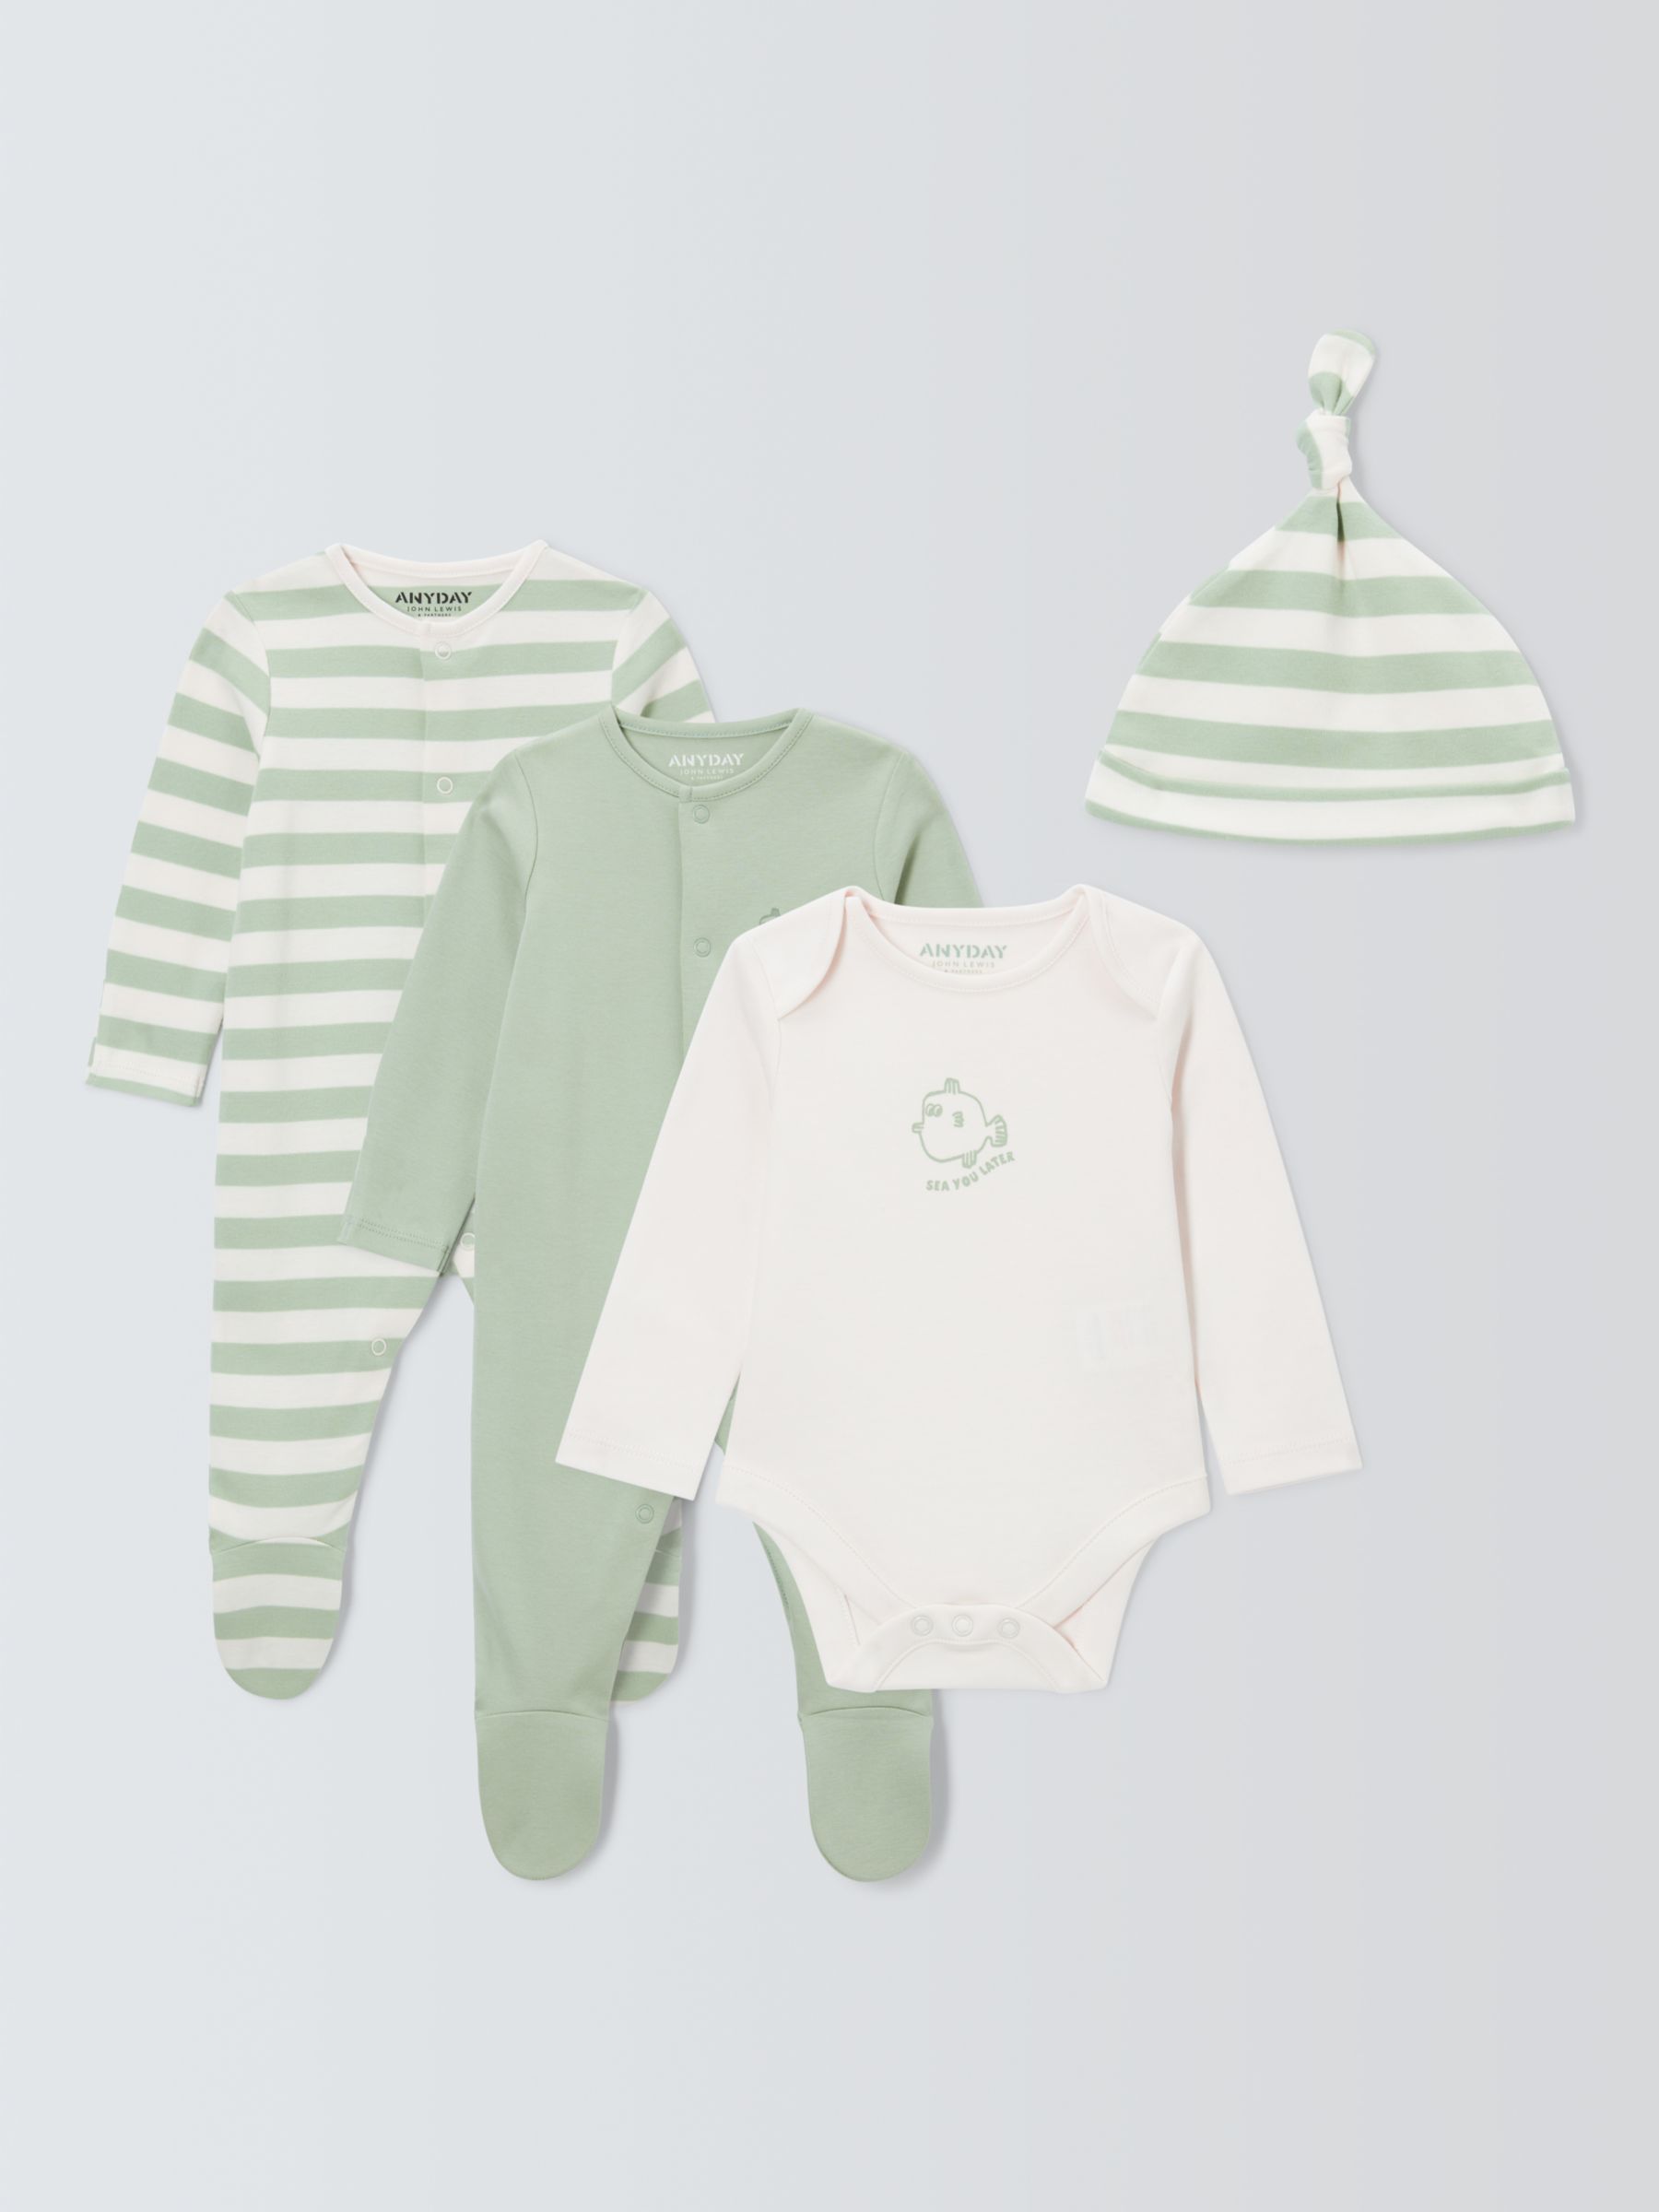 John Lewis ANYDAY Baby Sleepsuit, Bodysuit and Hat Set, Green, 0-3 months